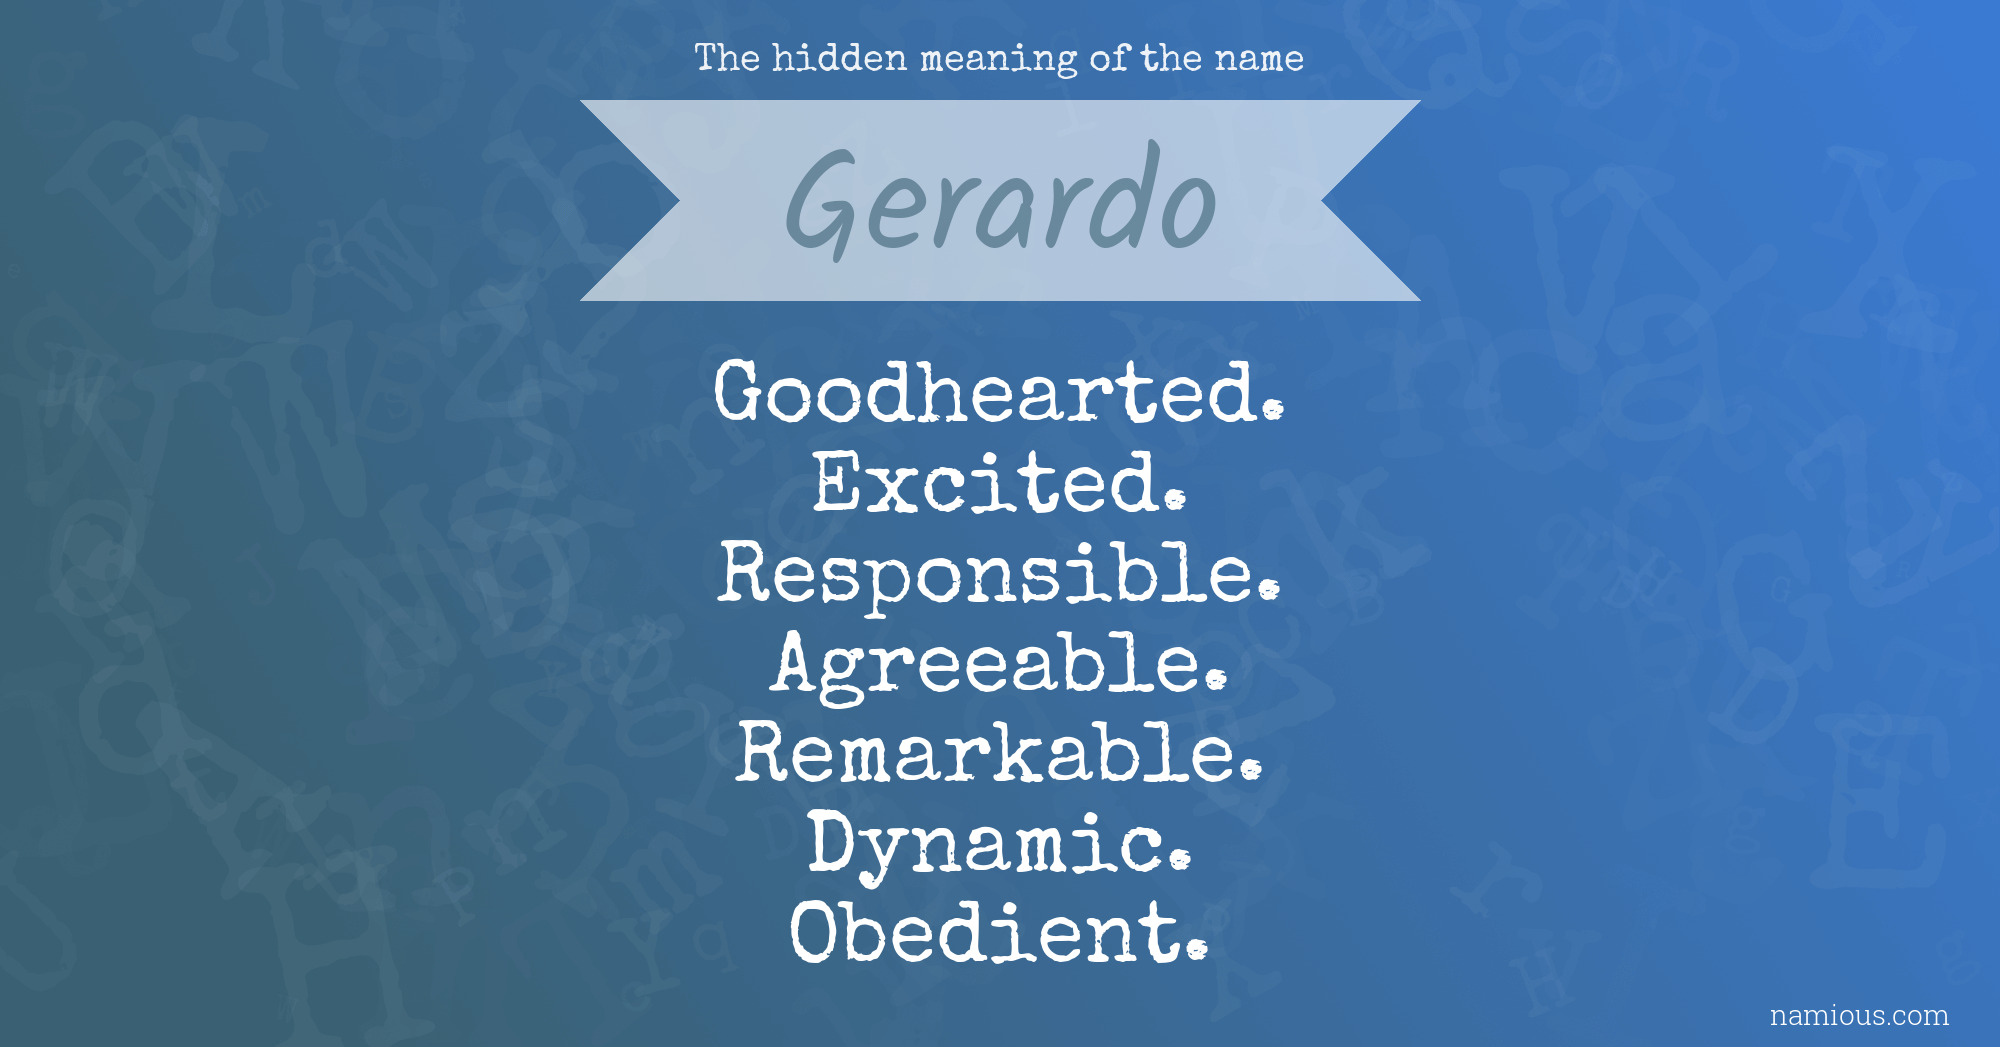 The hidden meaning of the name Gerardo